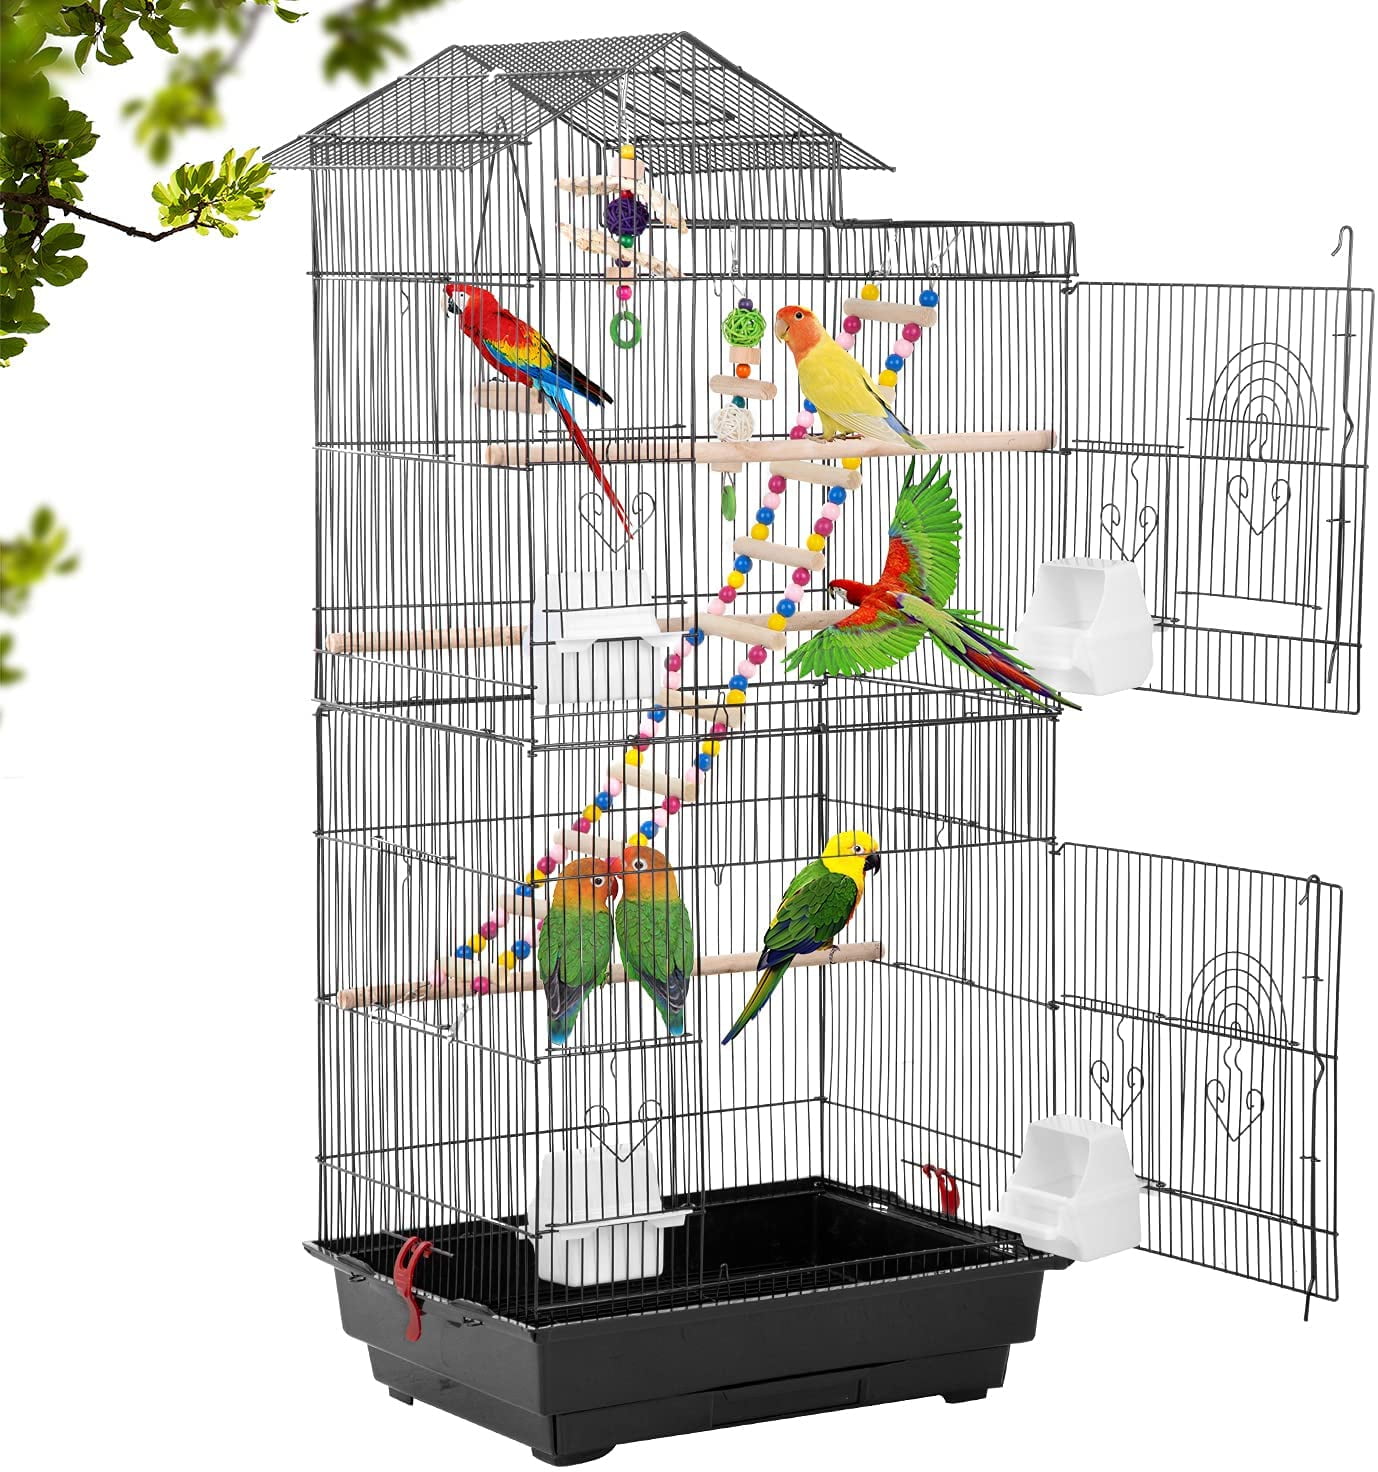 Adorable Small Iron Bird Cage with Bird on Top FREE SHIPPING 